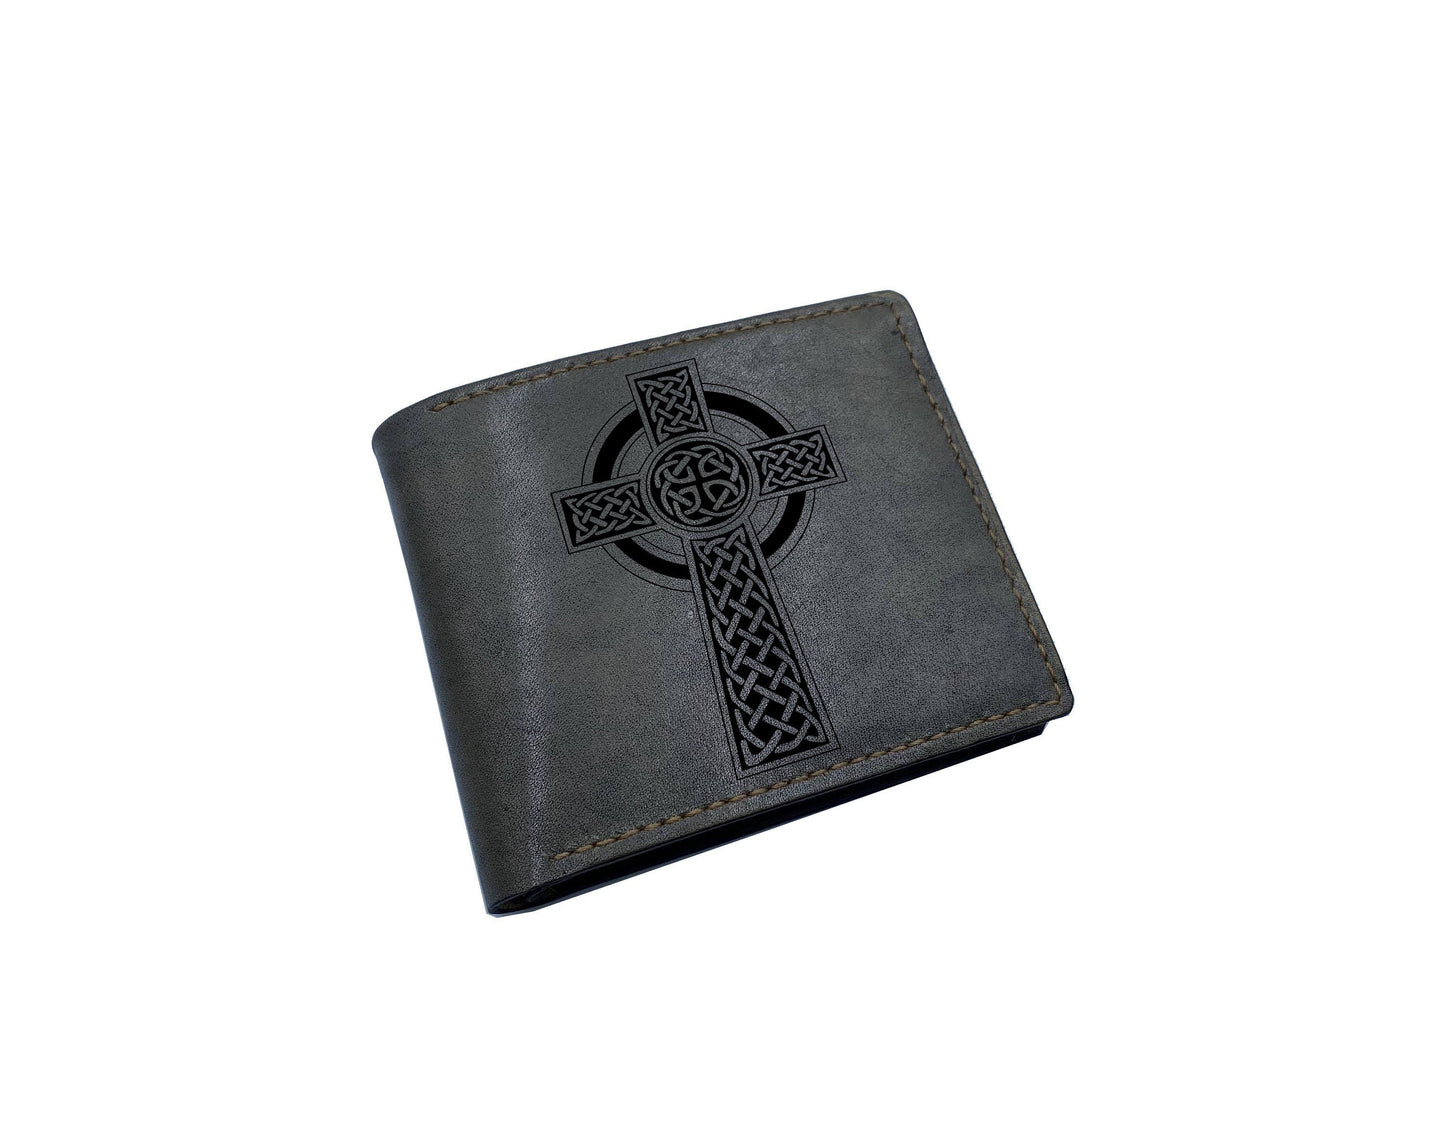 Celtic knot cross symbol, custom leather wallet, personalized leather present for dad, husband, brother, leather anniversary gift for friend